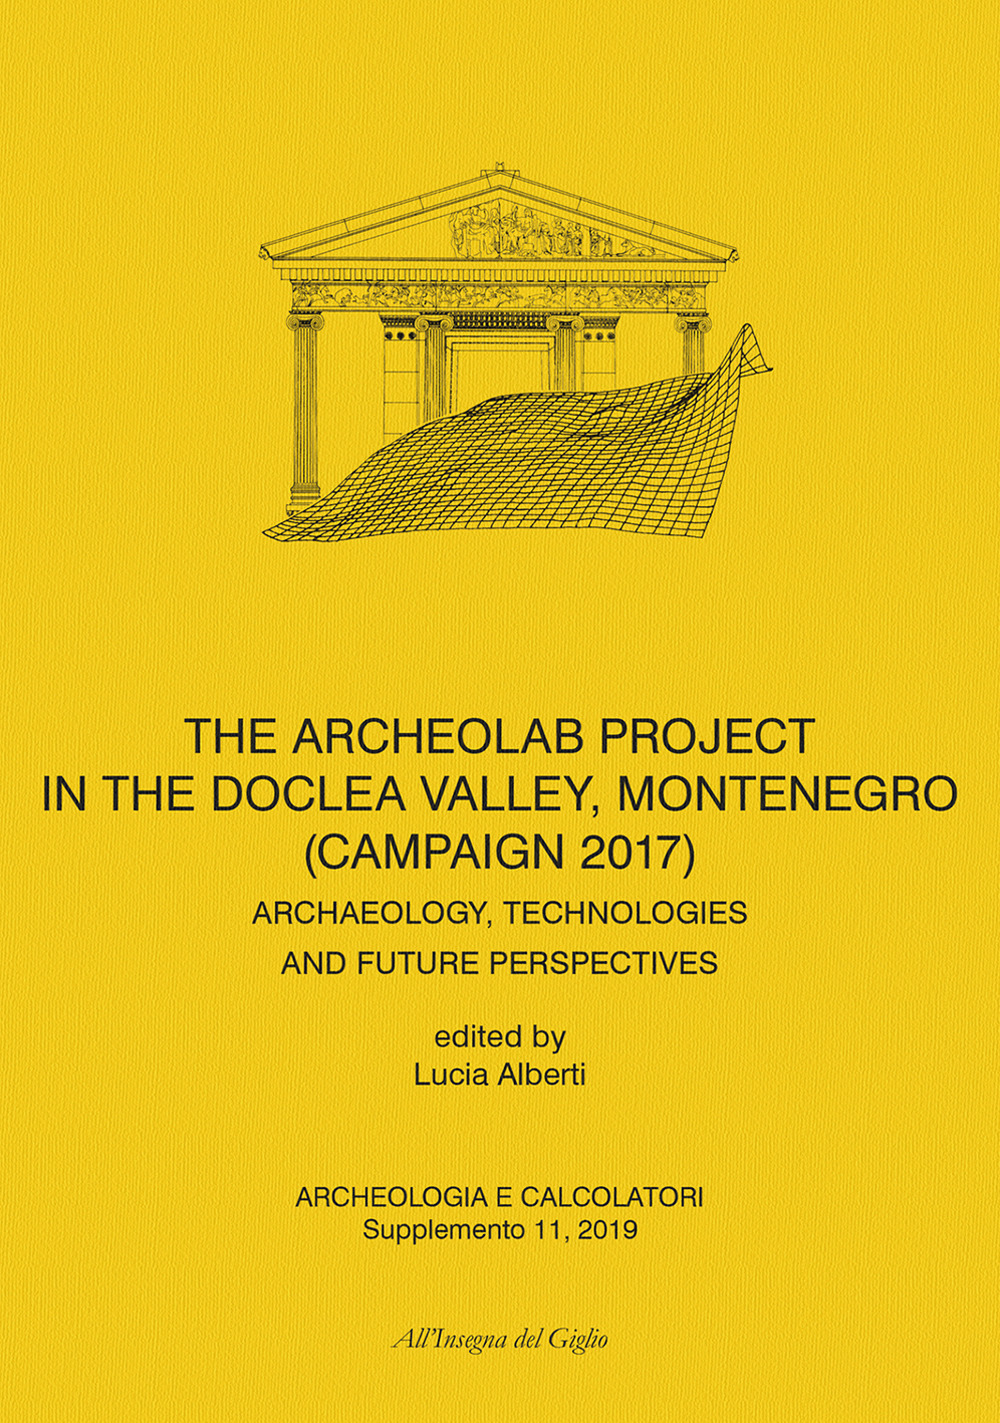 Archeologia e calcolatori. Supplemento (2019). Vol. 11: Archeolab project in the Doclea Valley, Montenegro (Campaign 2017). Archaeology, technologies and future perspectives